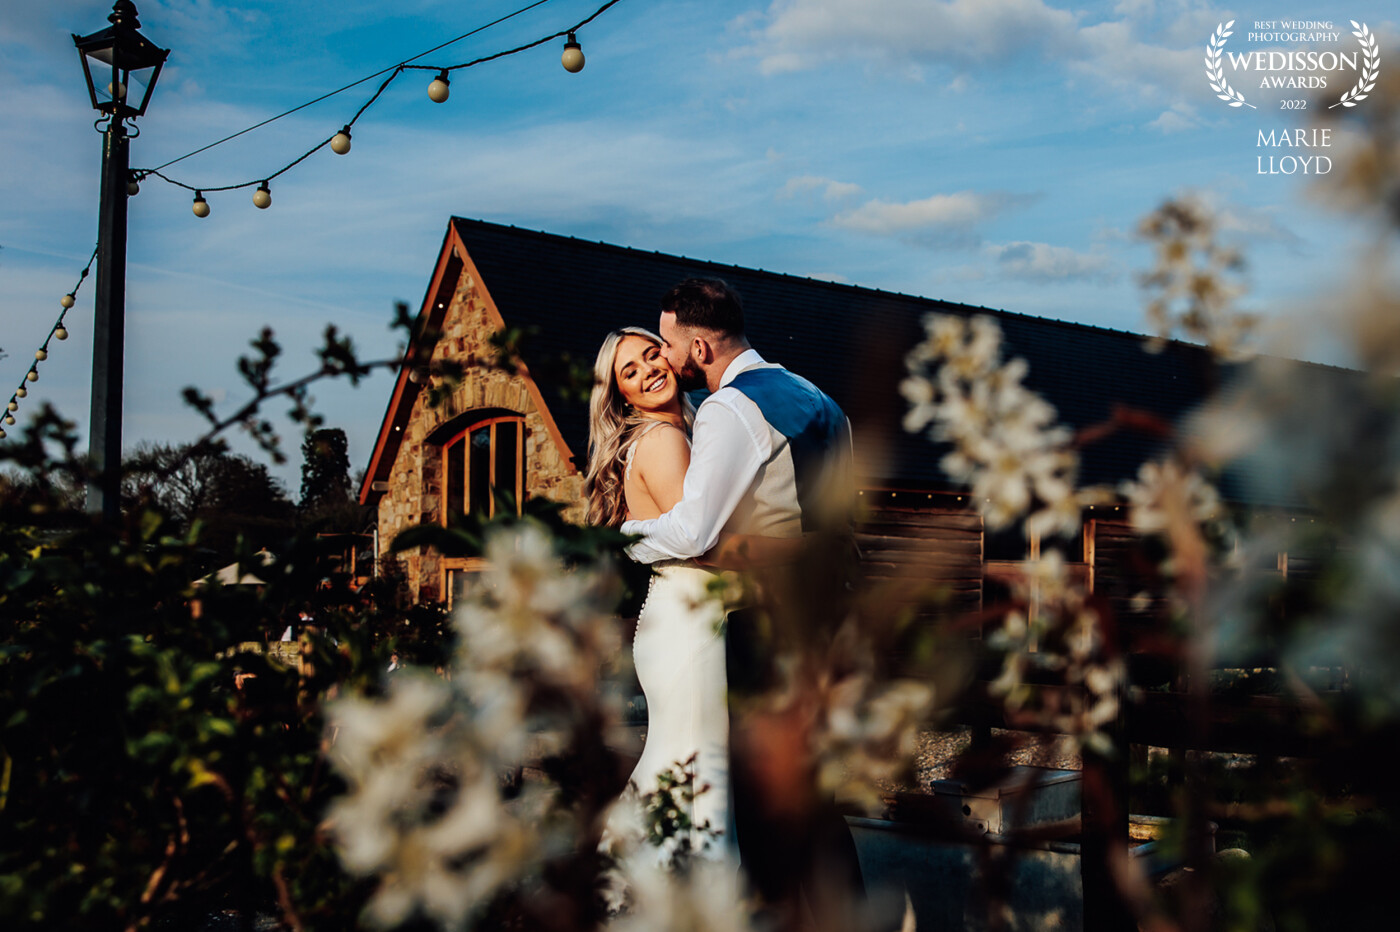 Photographed in the golden evening light at a barn wedding. The foliage and flowers were used as a foreground frame and the roof as a lead in line and frame. It was shot at a low angle.